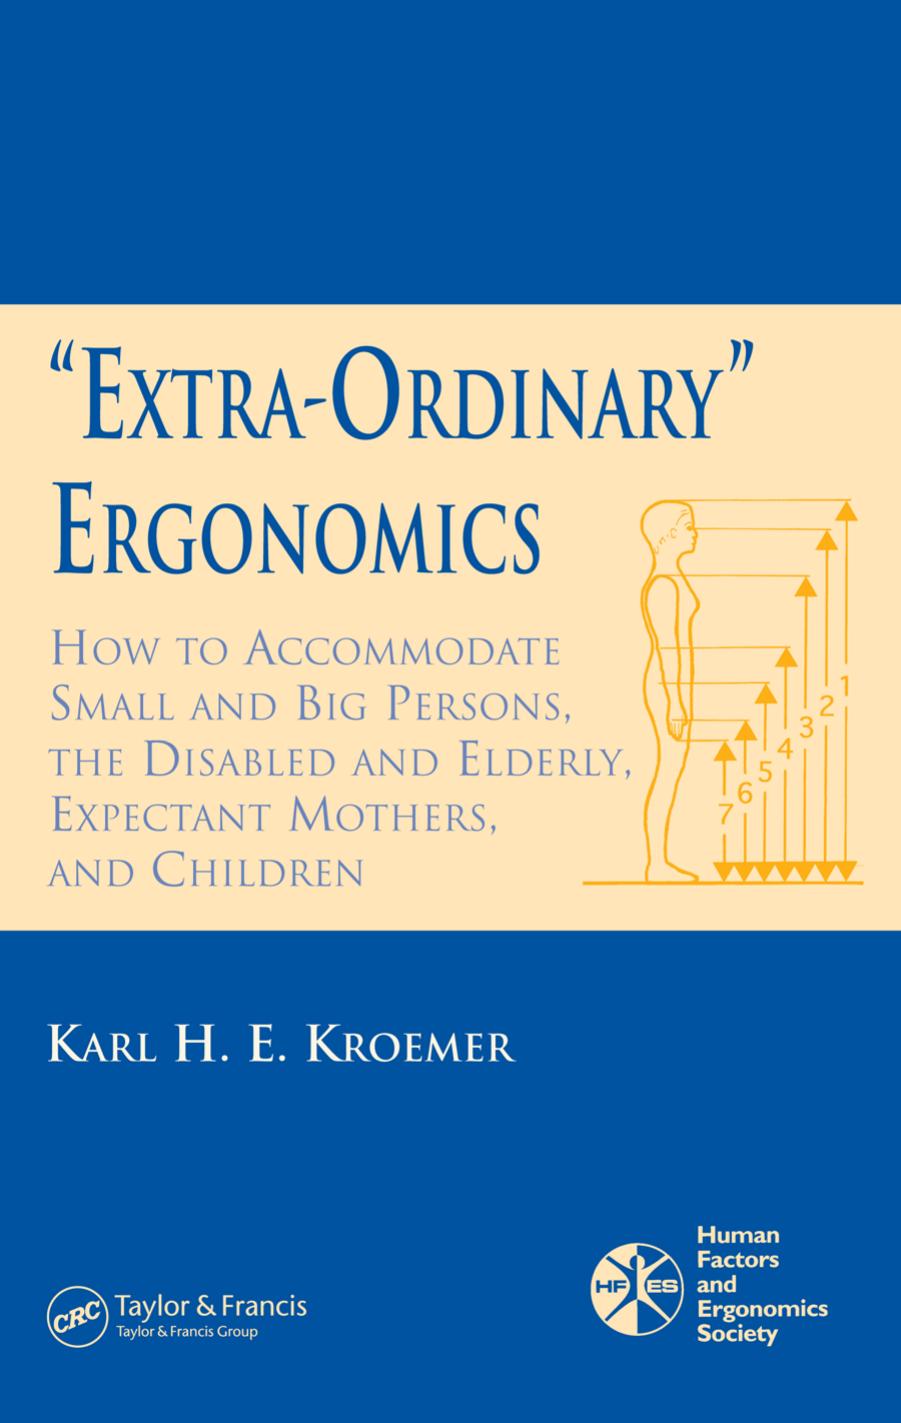 Extra-Ordinary Ergonomics: How to Accommodate Small and Big Persons, the Disabled and Elderly, Expectant Mothers, and Children by Karl H.E. Kroemer